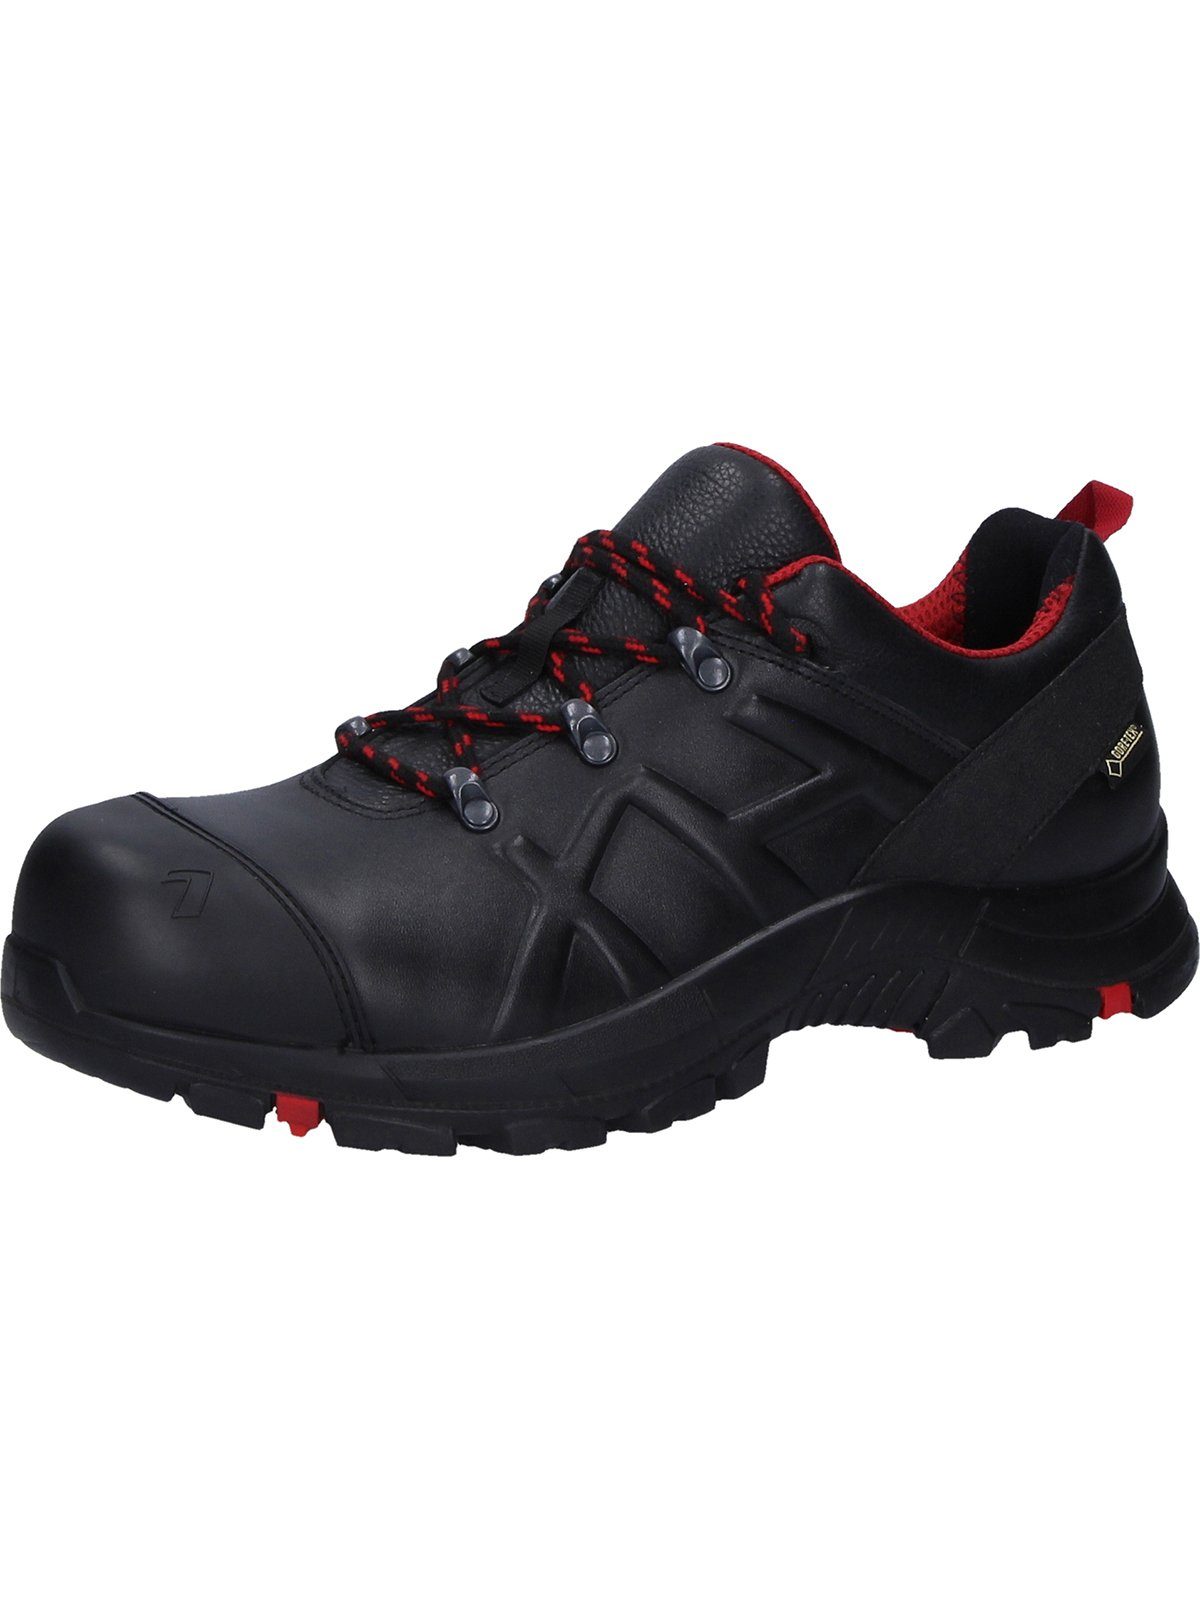 black/red Black 54 Safety haix Eagle Arbeitsschuh low